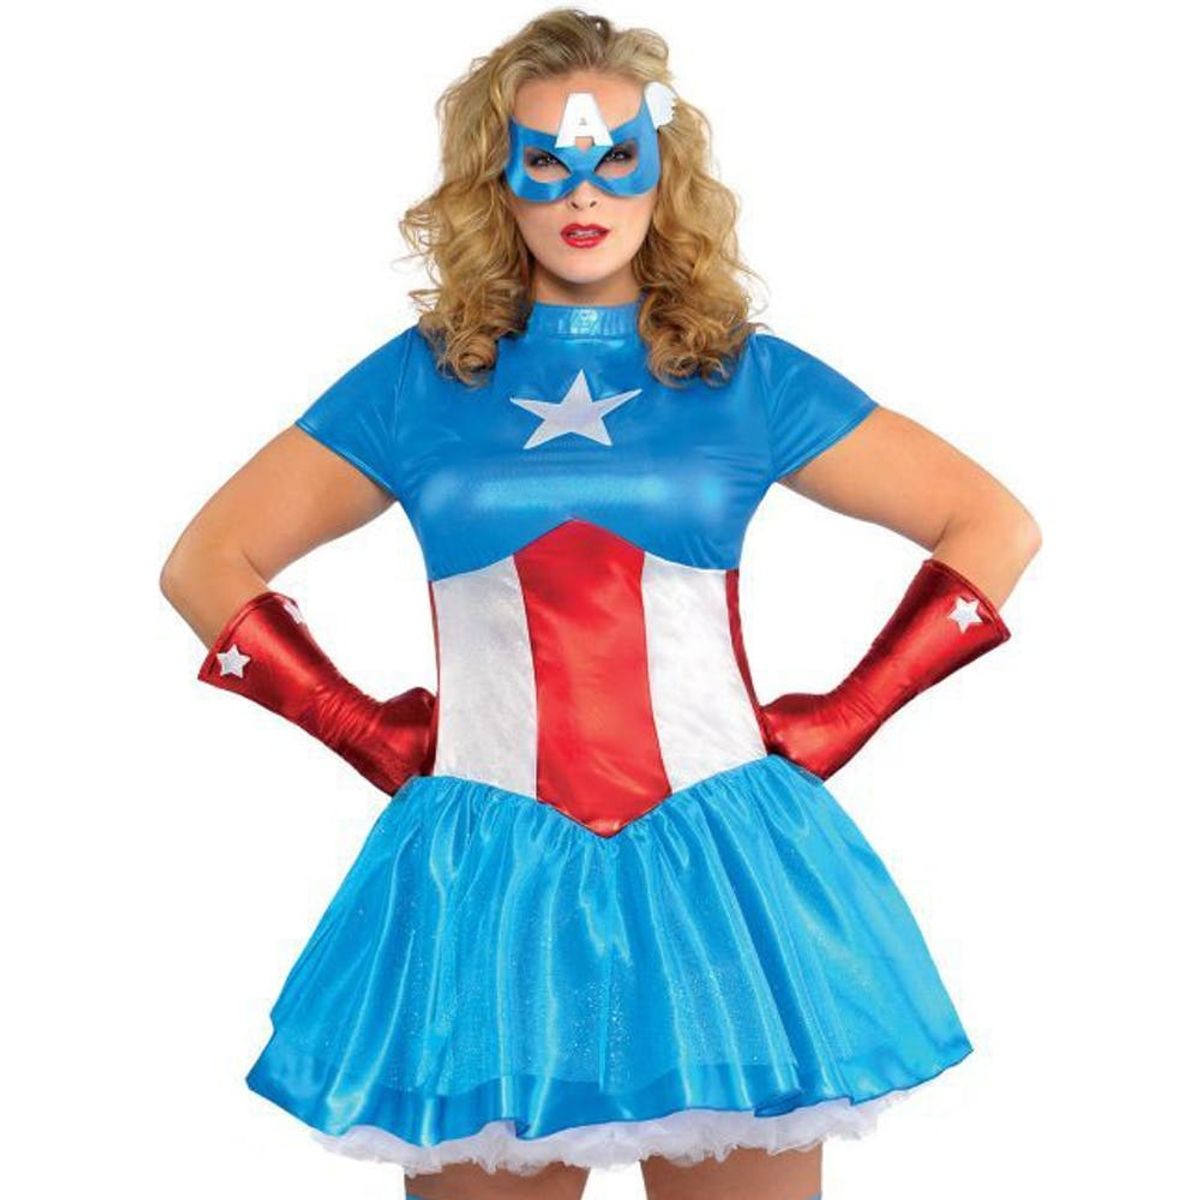 30 Shoppable Plus-Size Costumes from Party City